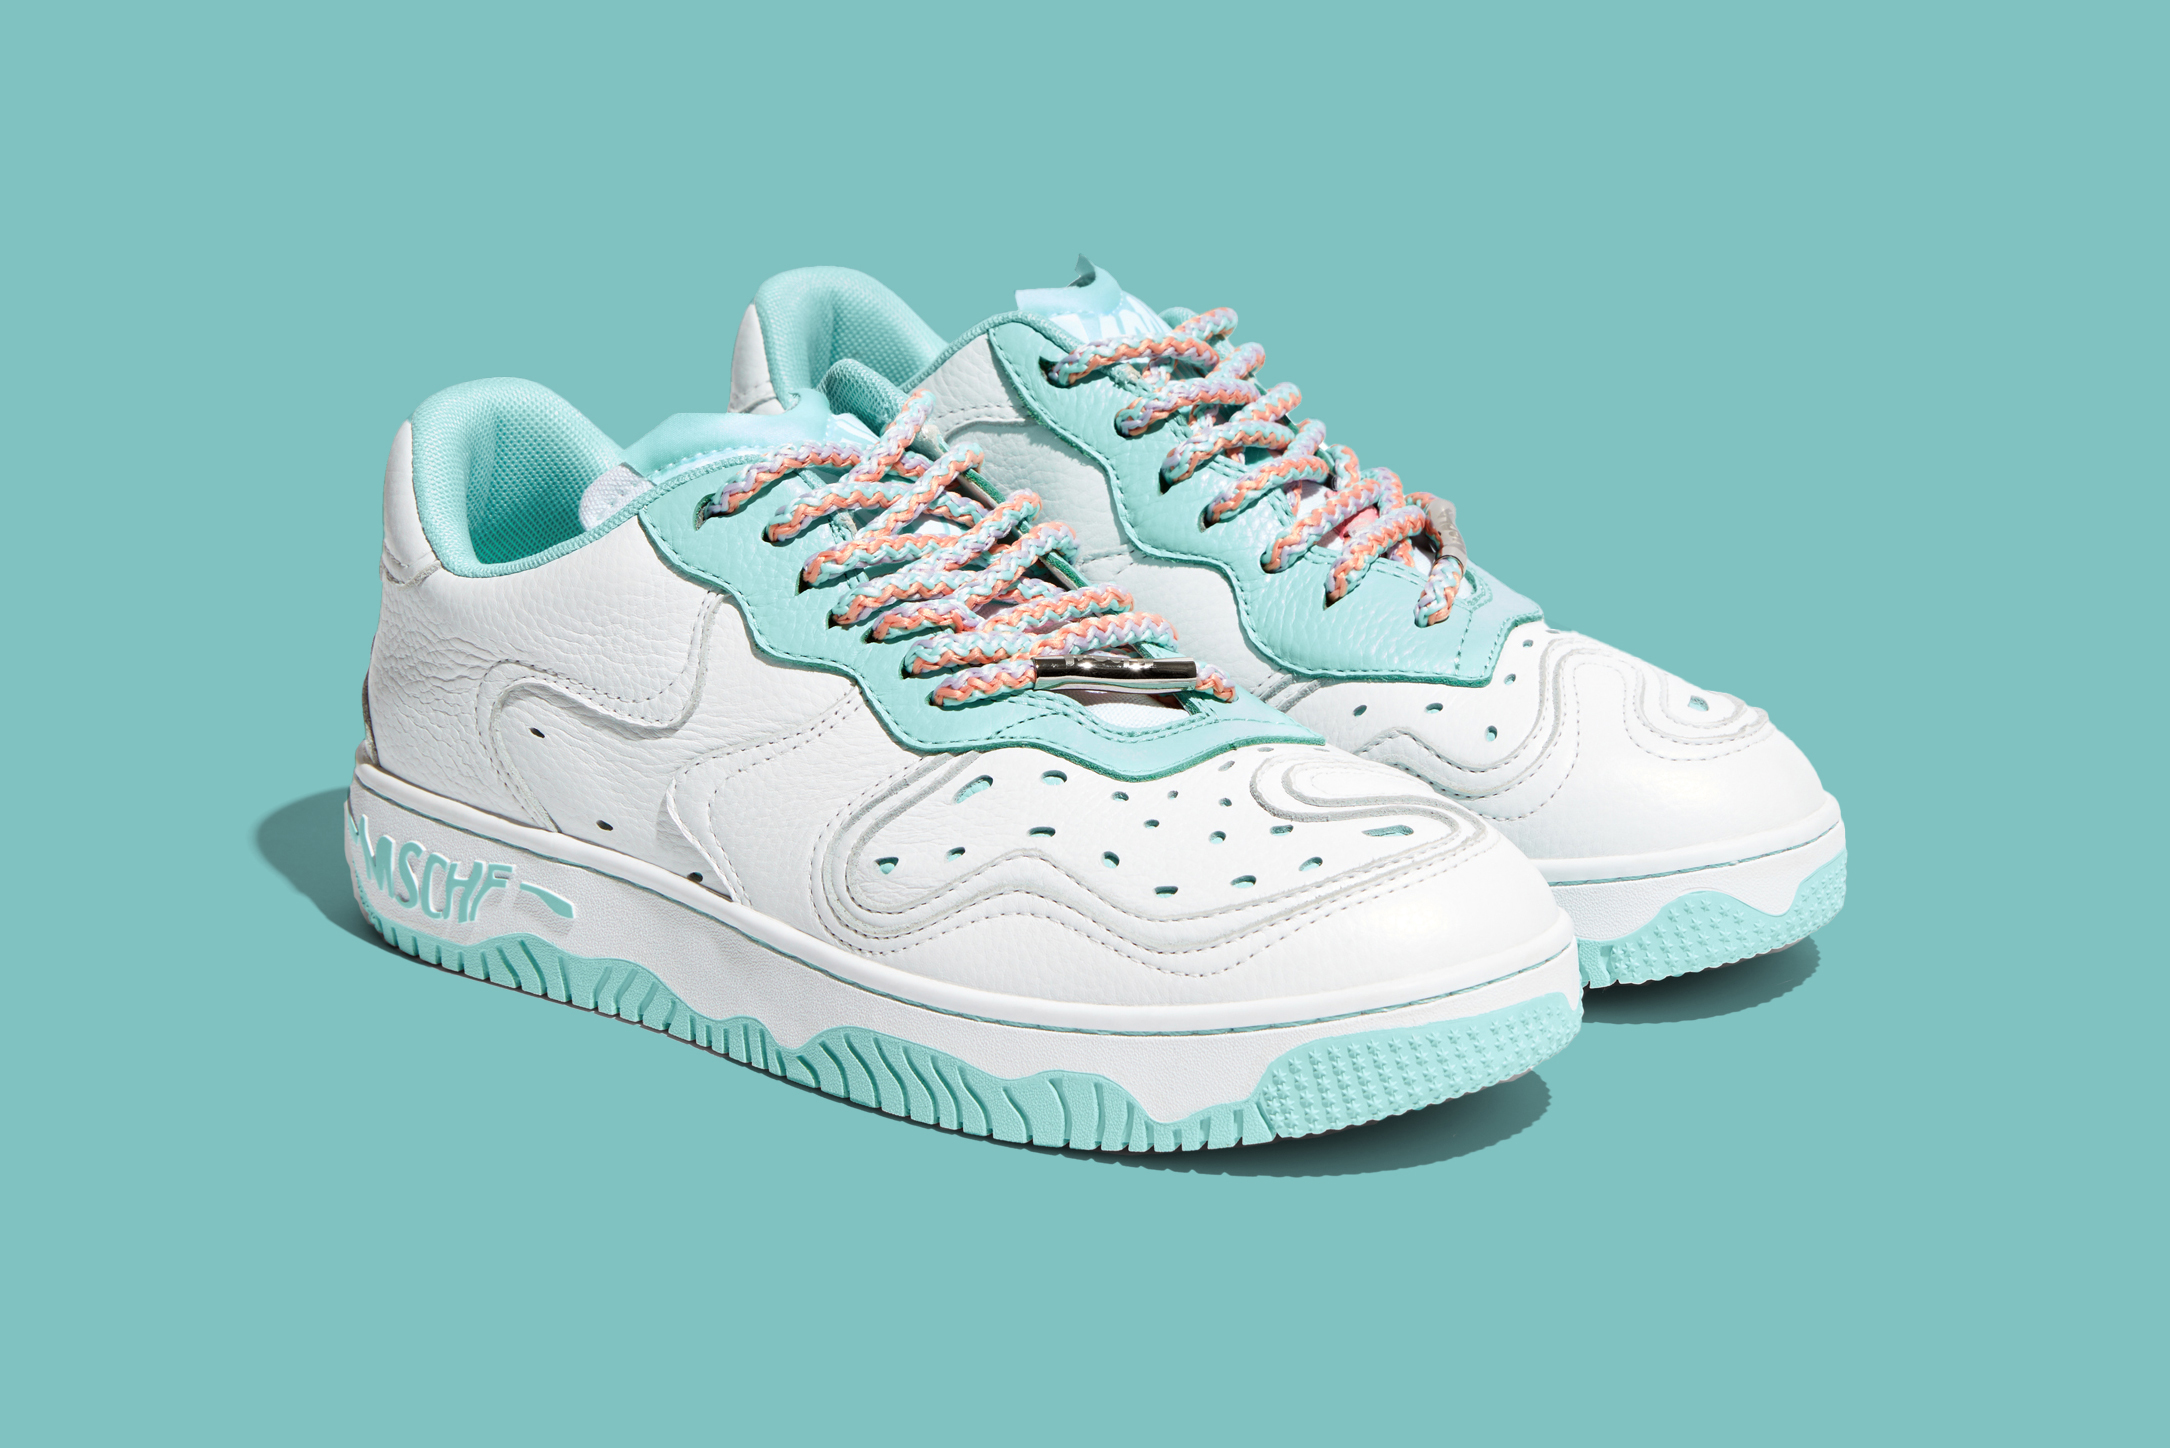 MSCHF Drops a Clean “Mint” Super Normal 2 for Spring